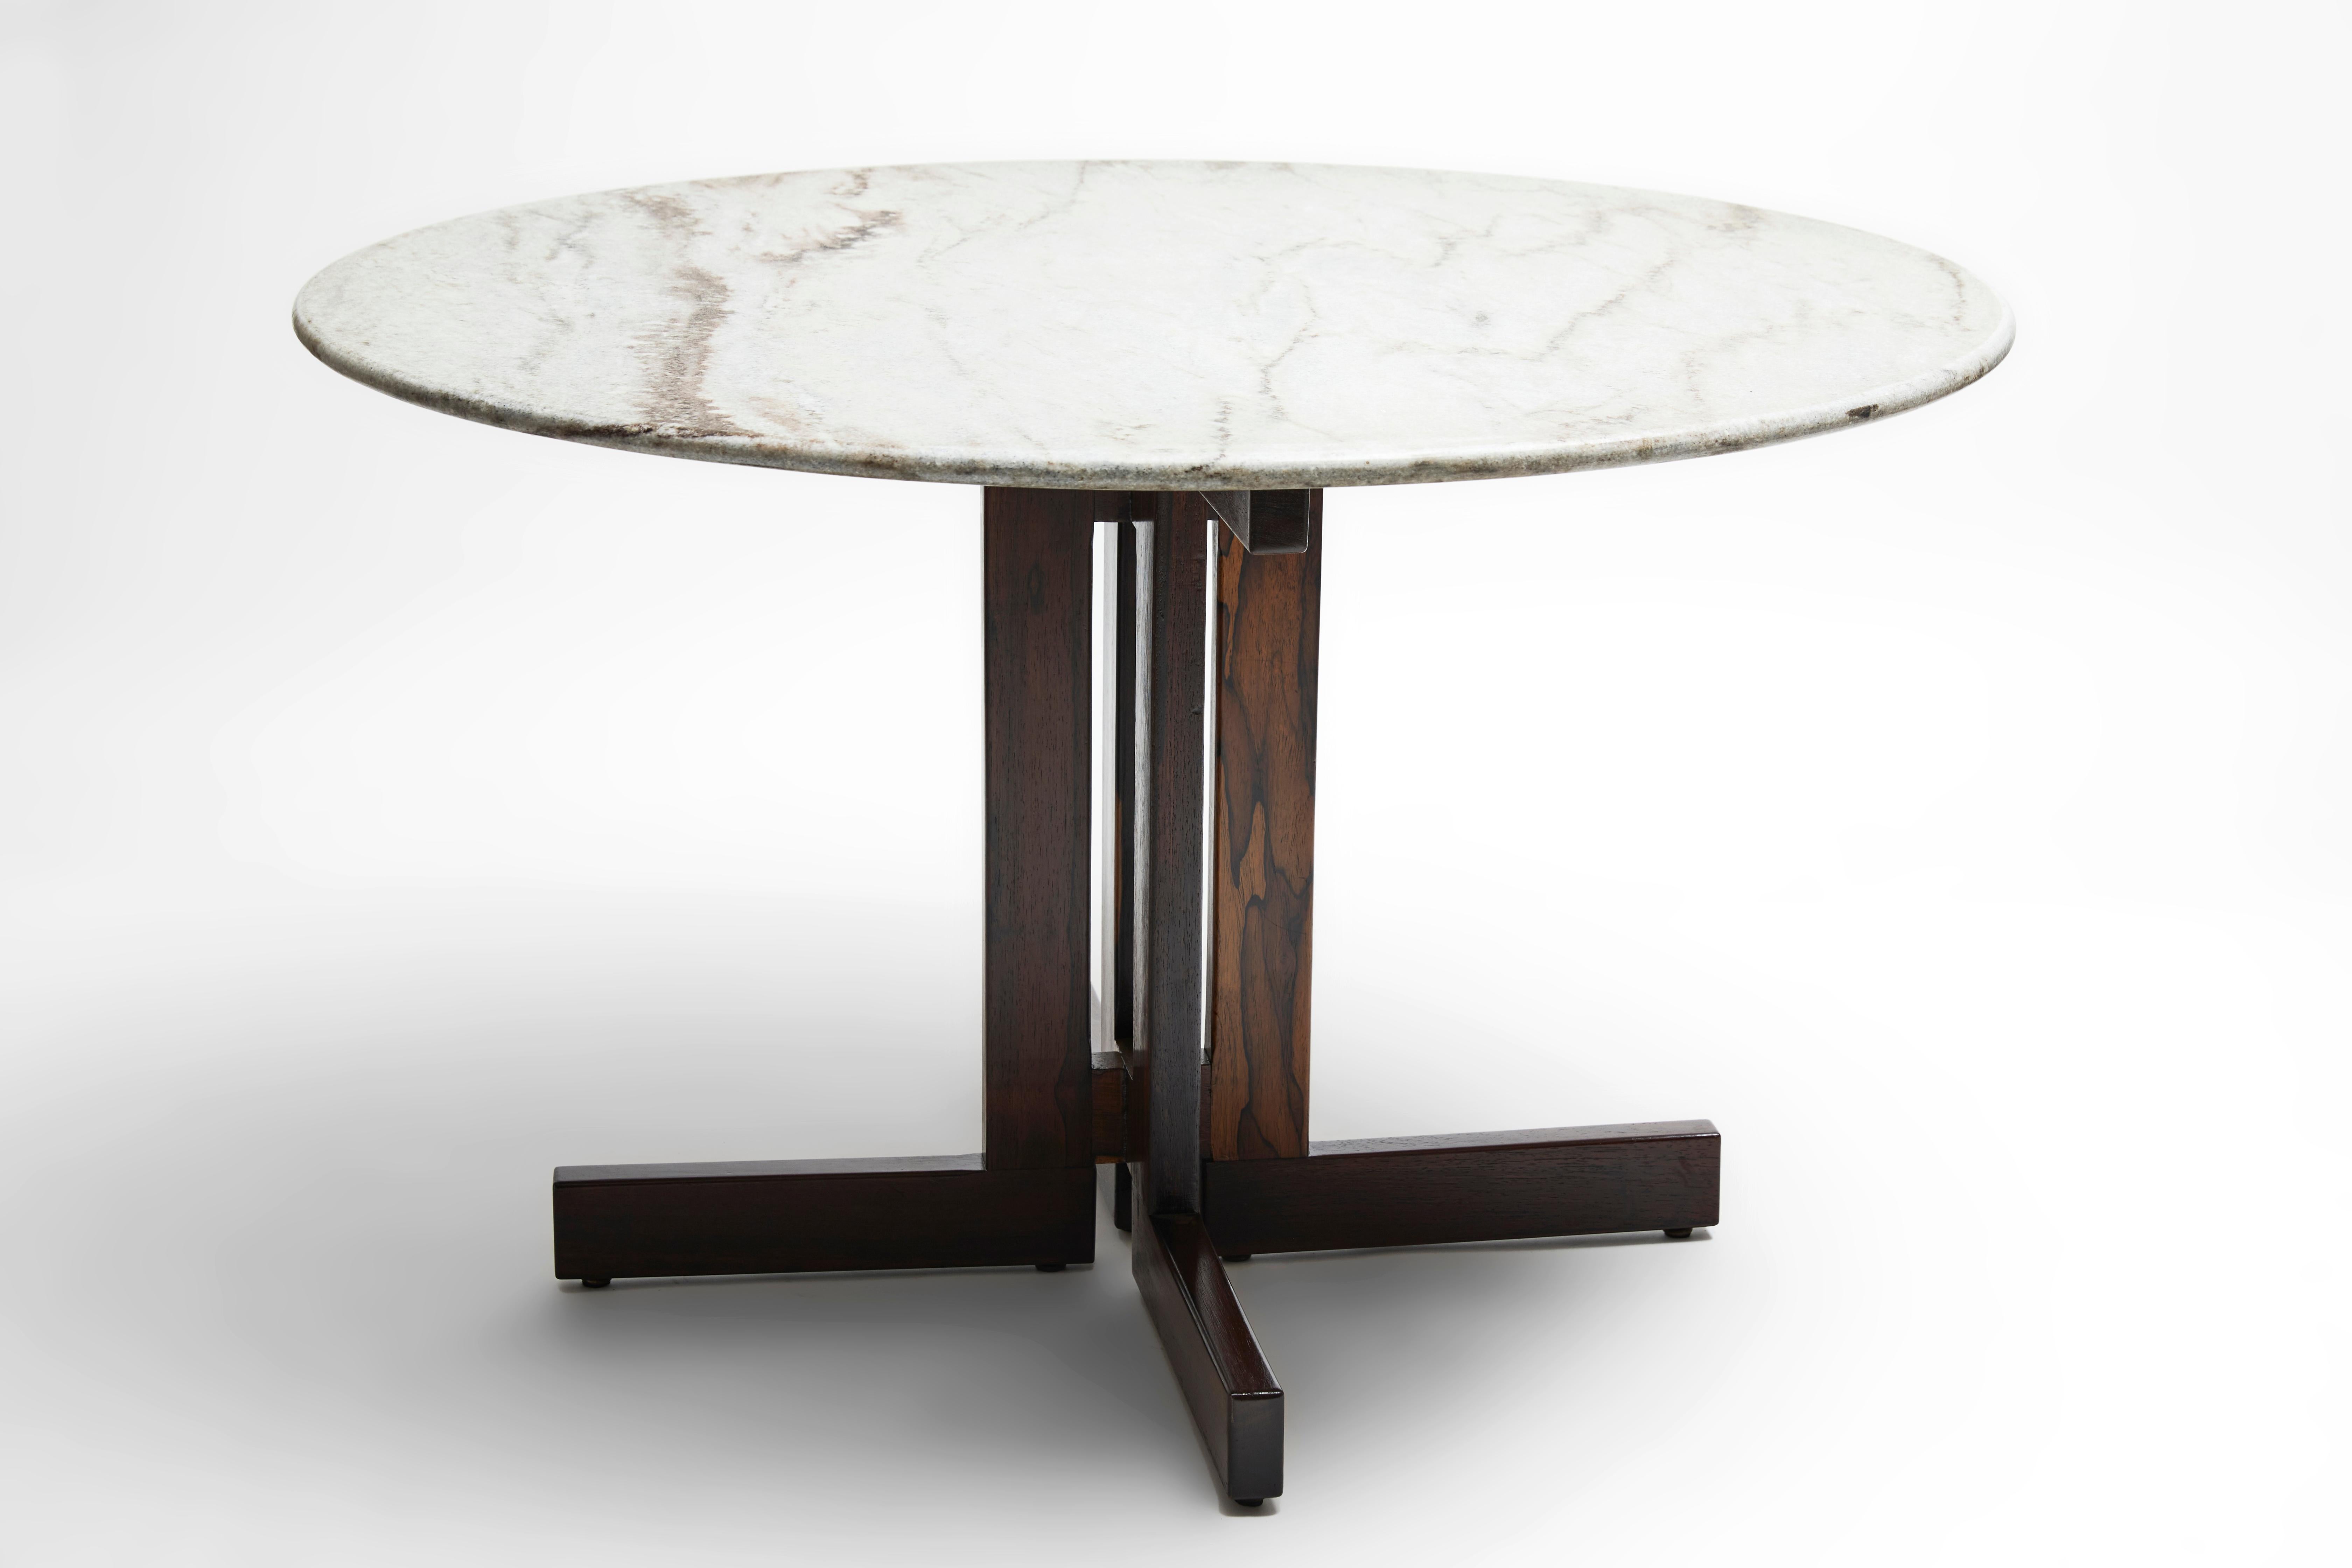 Available now, this Mid-Century Modern round table in hardwood & marble designed by Celina in Brazil in the sixties is gorgeous!

This Brazilian Modern beauty is executed in Brazilian Rosewood (as known as Jacaranda) with a 